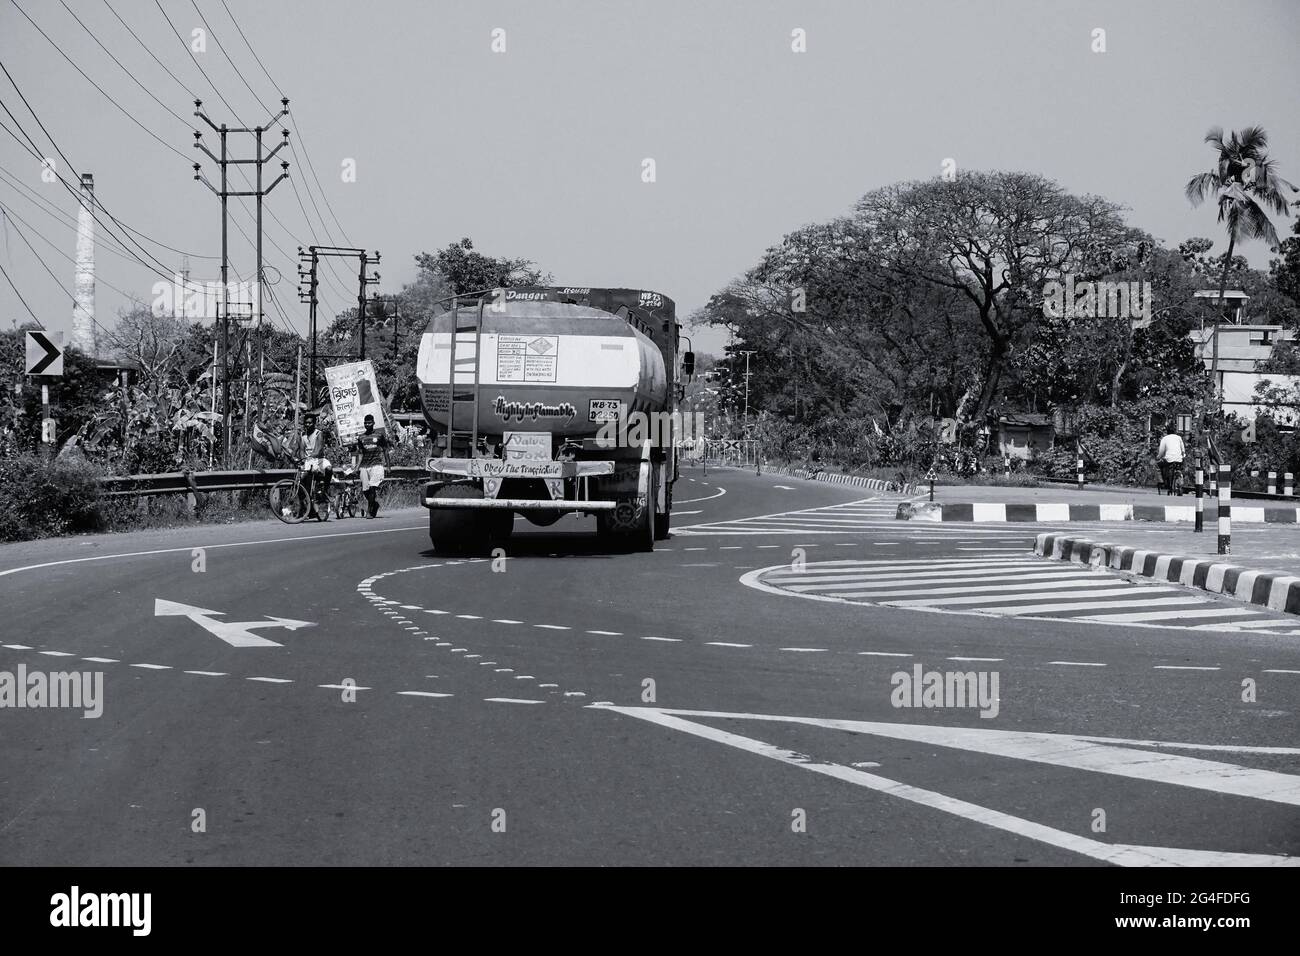 HOWRAH, WEST BENGAL, INDIA - FEBRUARY 24TH, 2018 : A petrol carriage truck is carrying petrol on the highway in daytime. Black and white image. Stock Photo